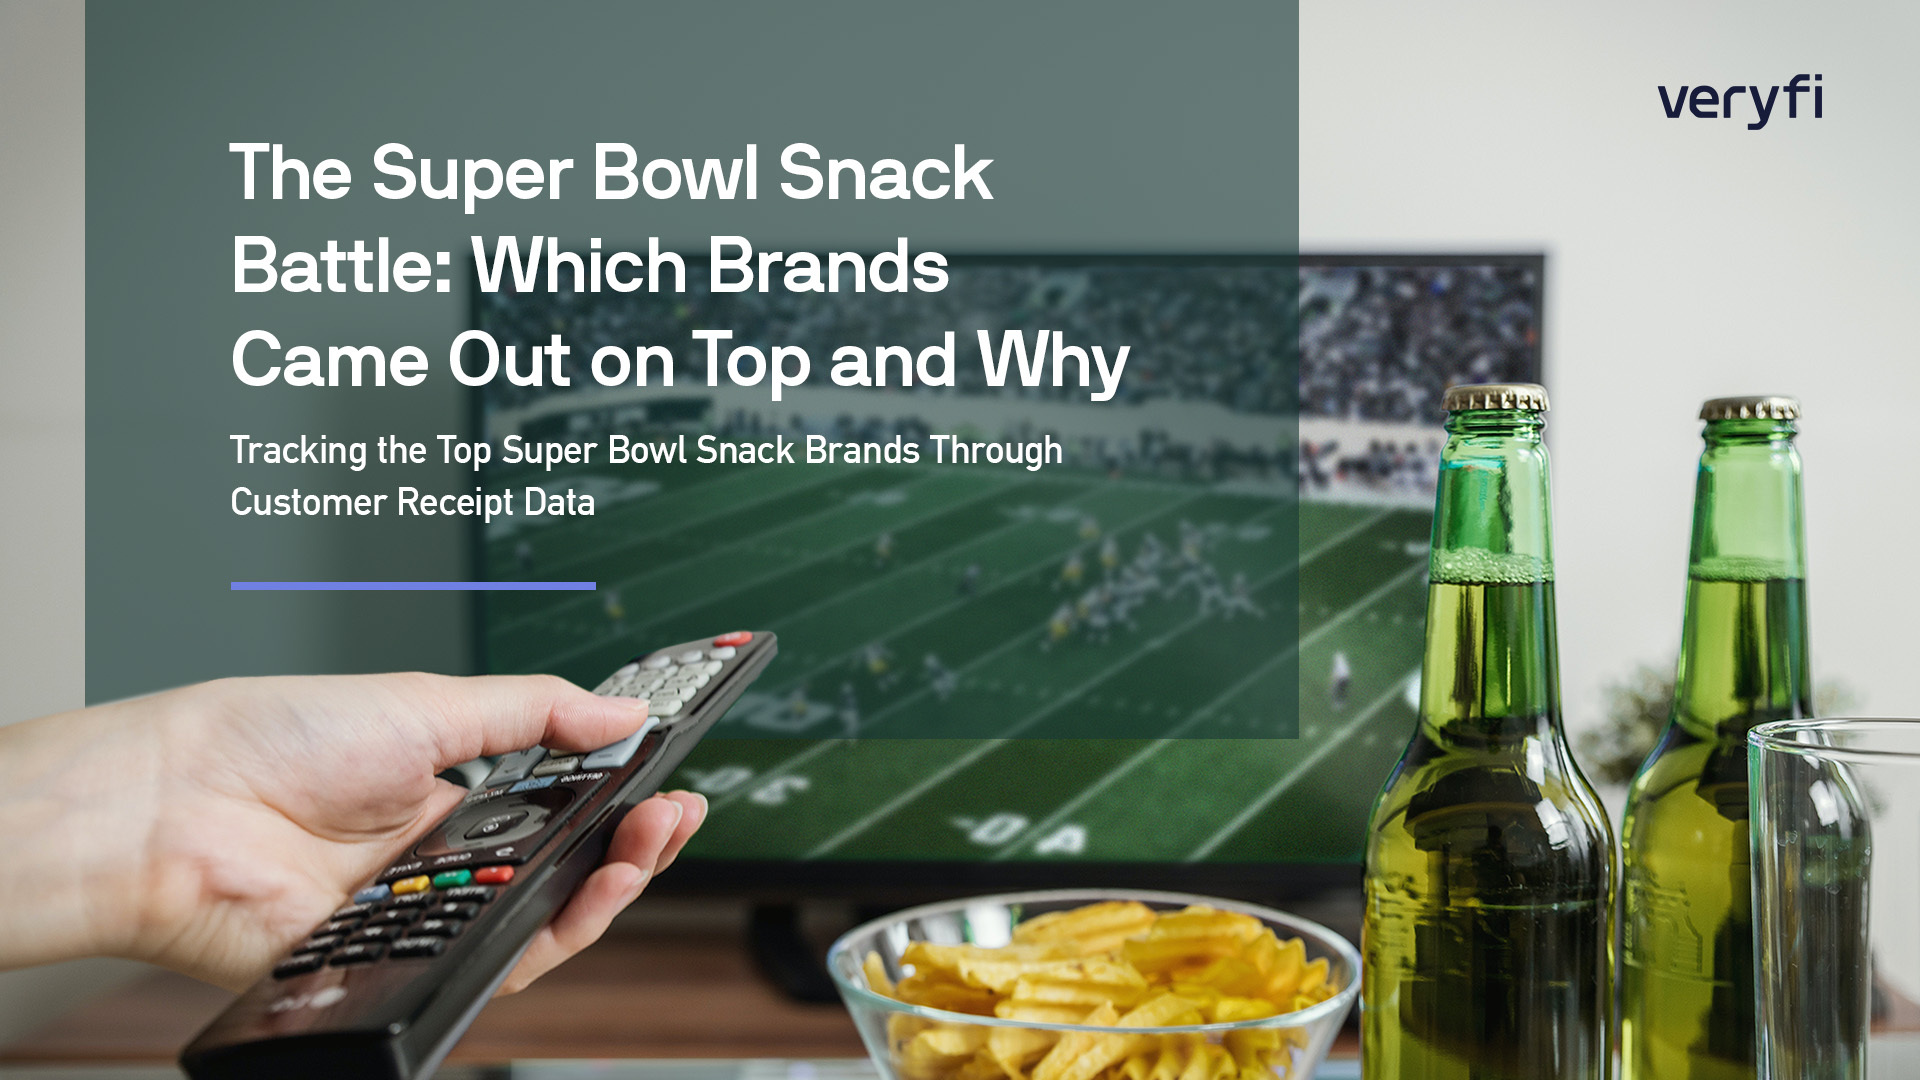 A hand holding a remote control pointed at the TV that's showing a foot ball game. Bowl of chips and two bottles of beer are next to the TV.